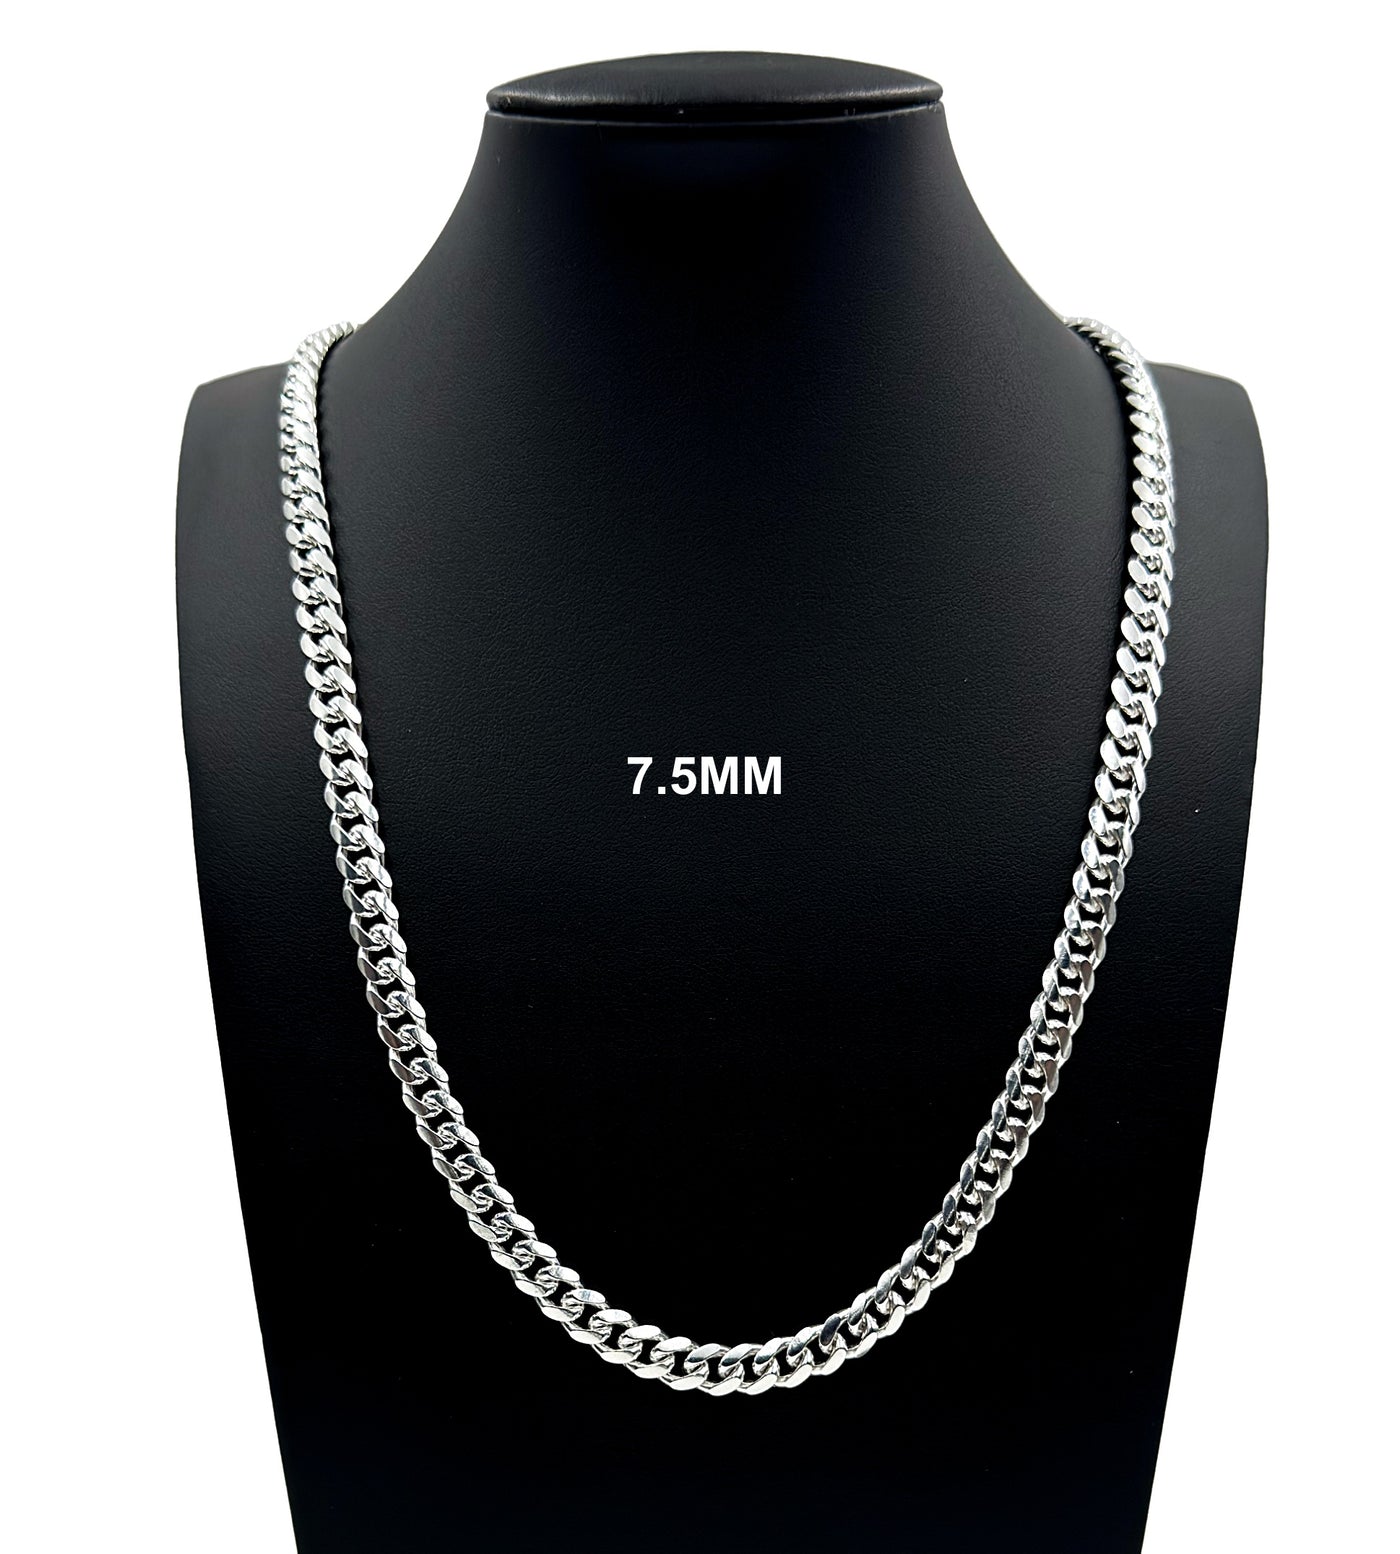 Real 7.5MM Solid 925 Sterling Silver Italian MIAMI CUBAN LINK CHAIN Necklace UNISEX